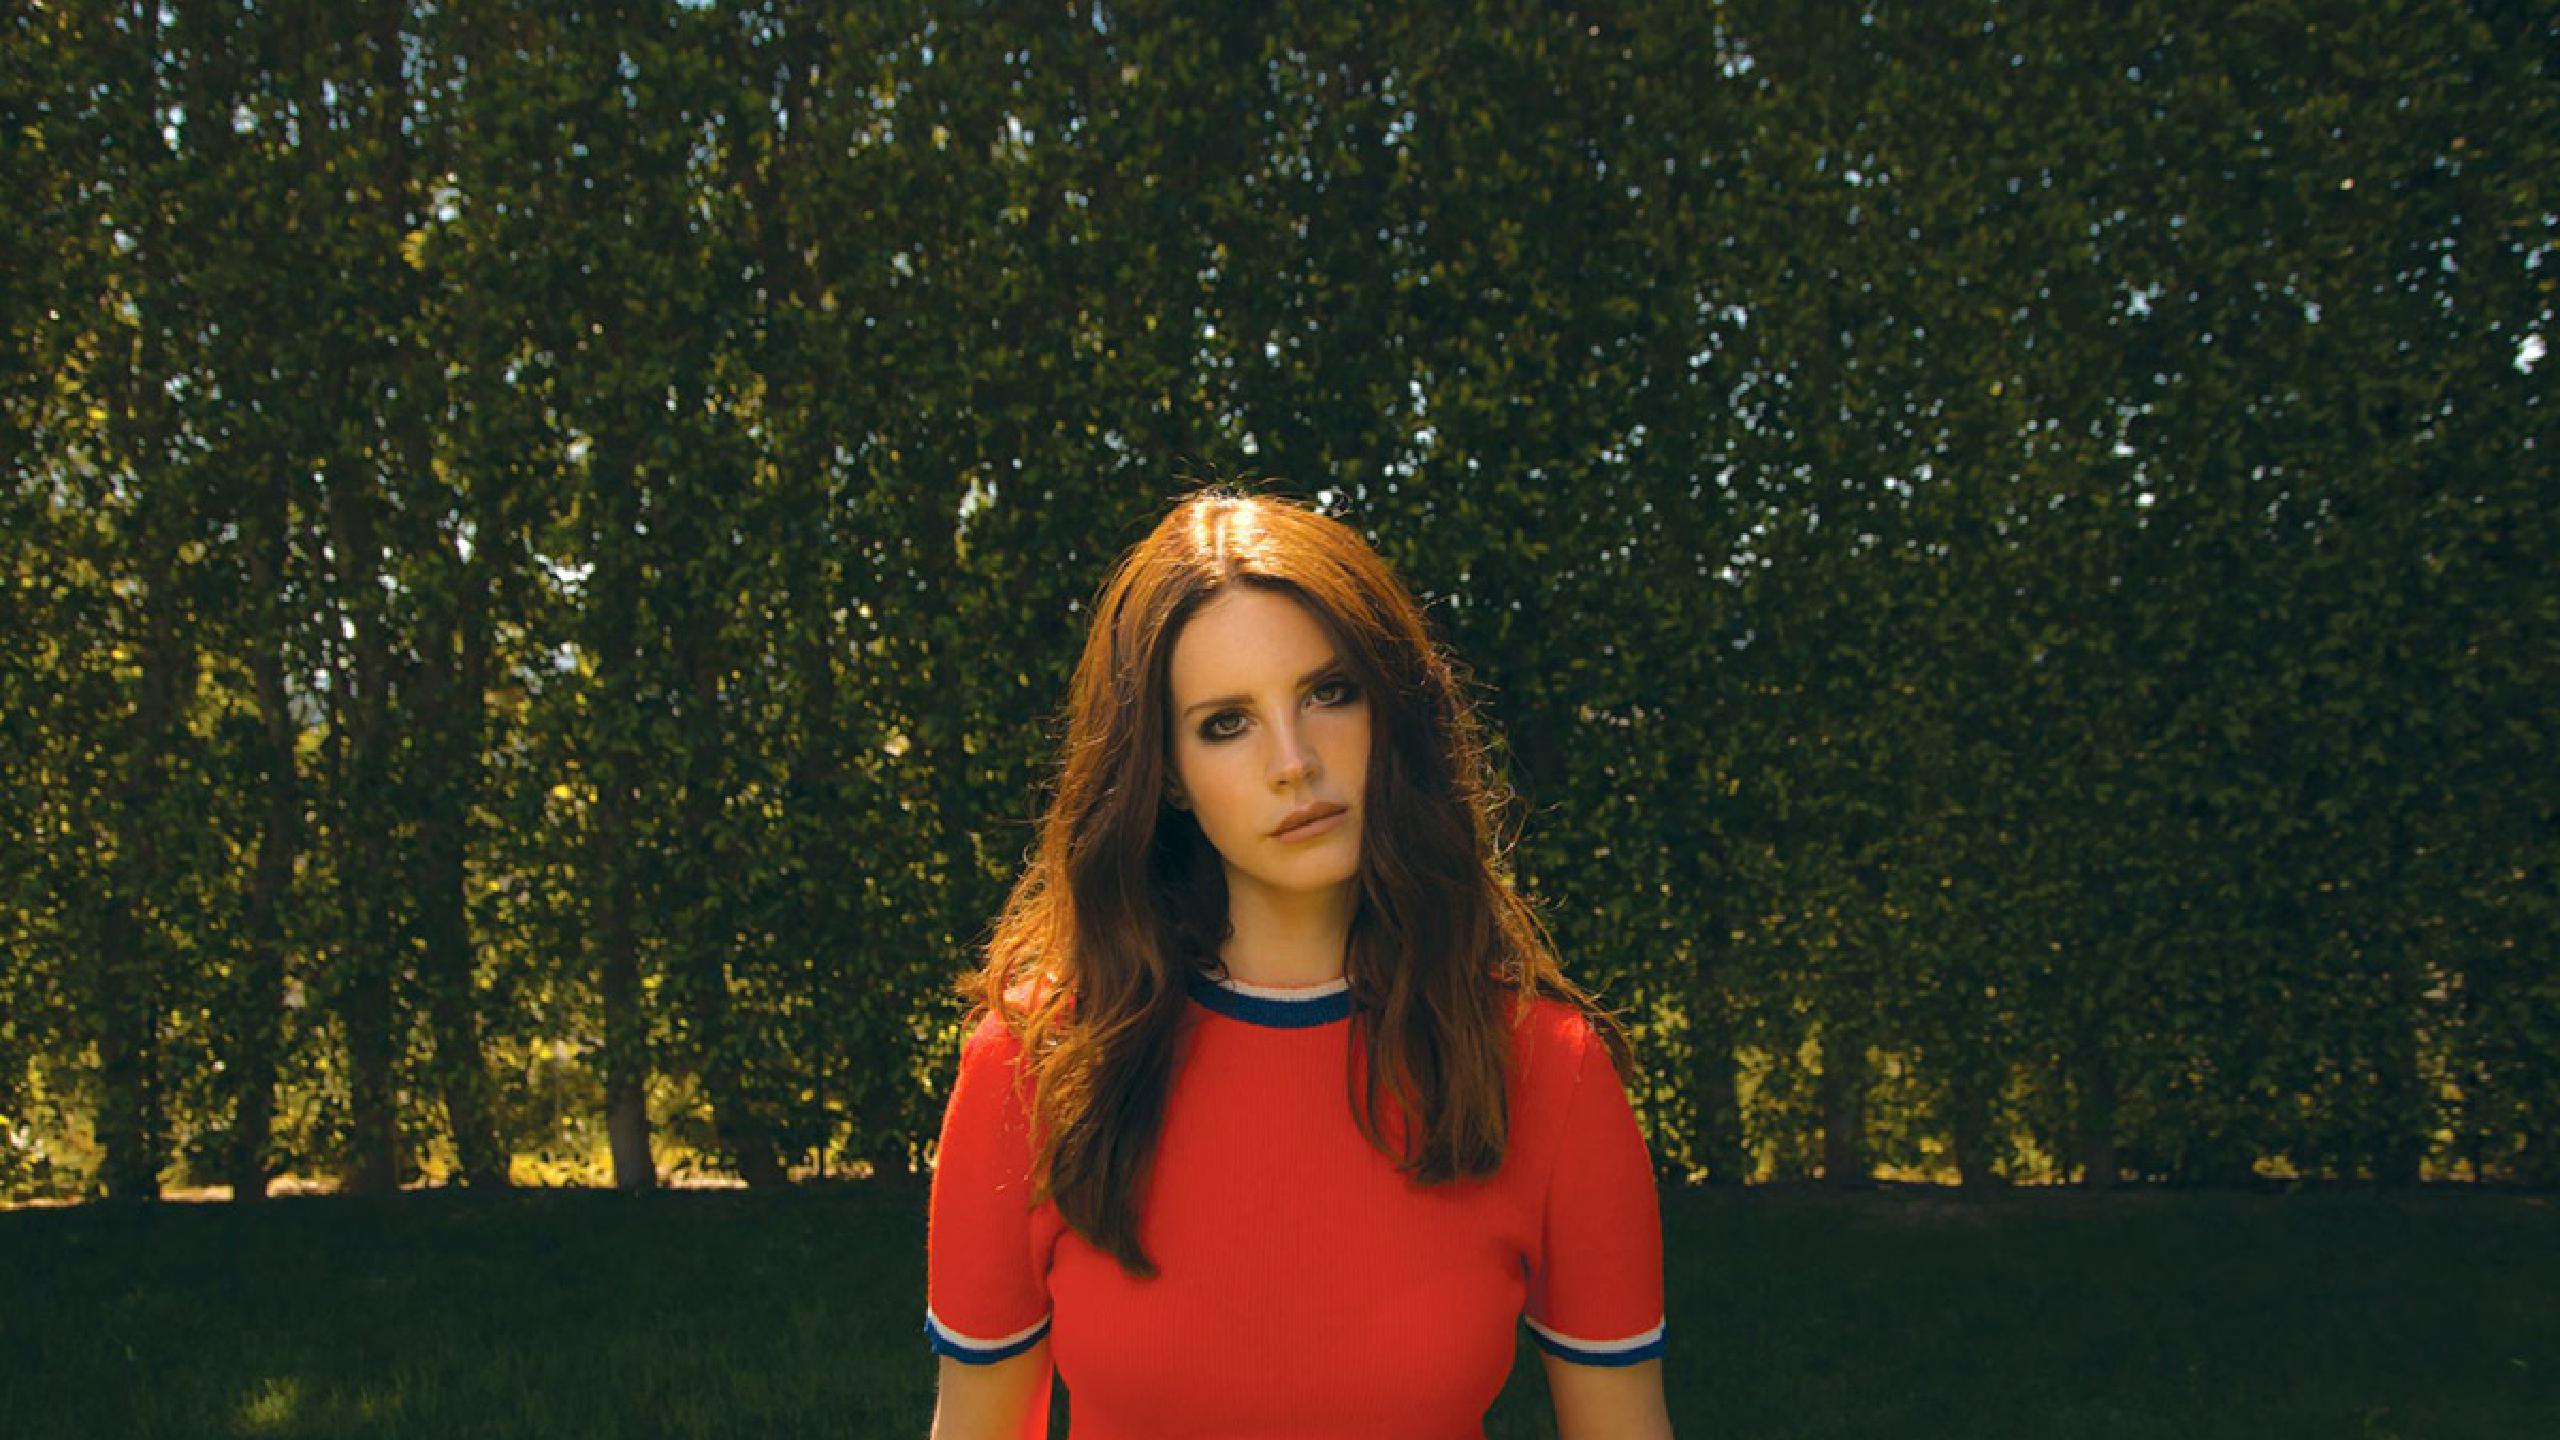 Lana del Rey tour dates 2019 2020. Lana del Rey tickets and concerts